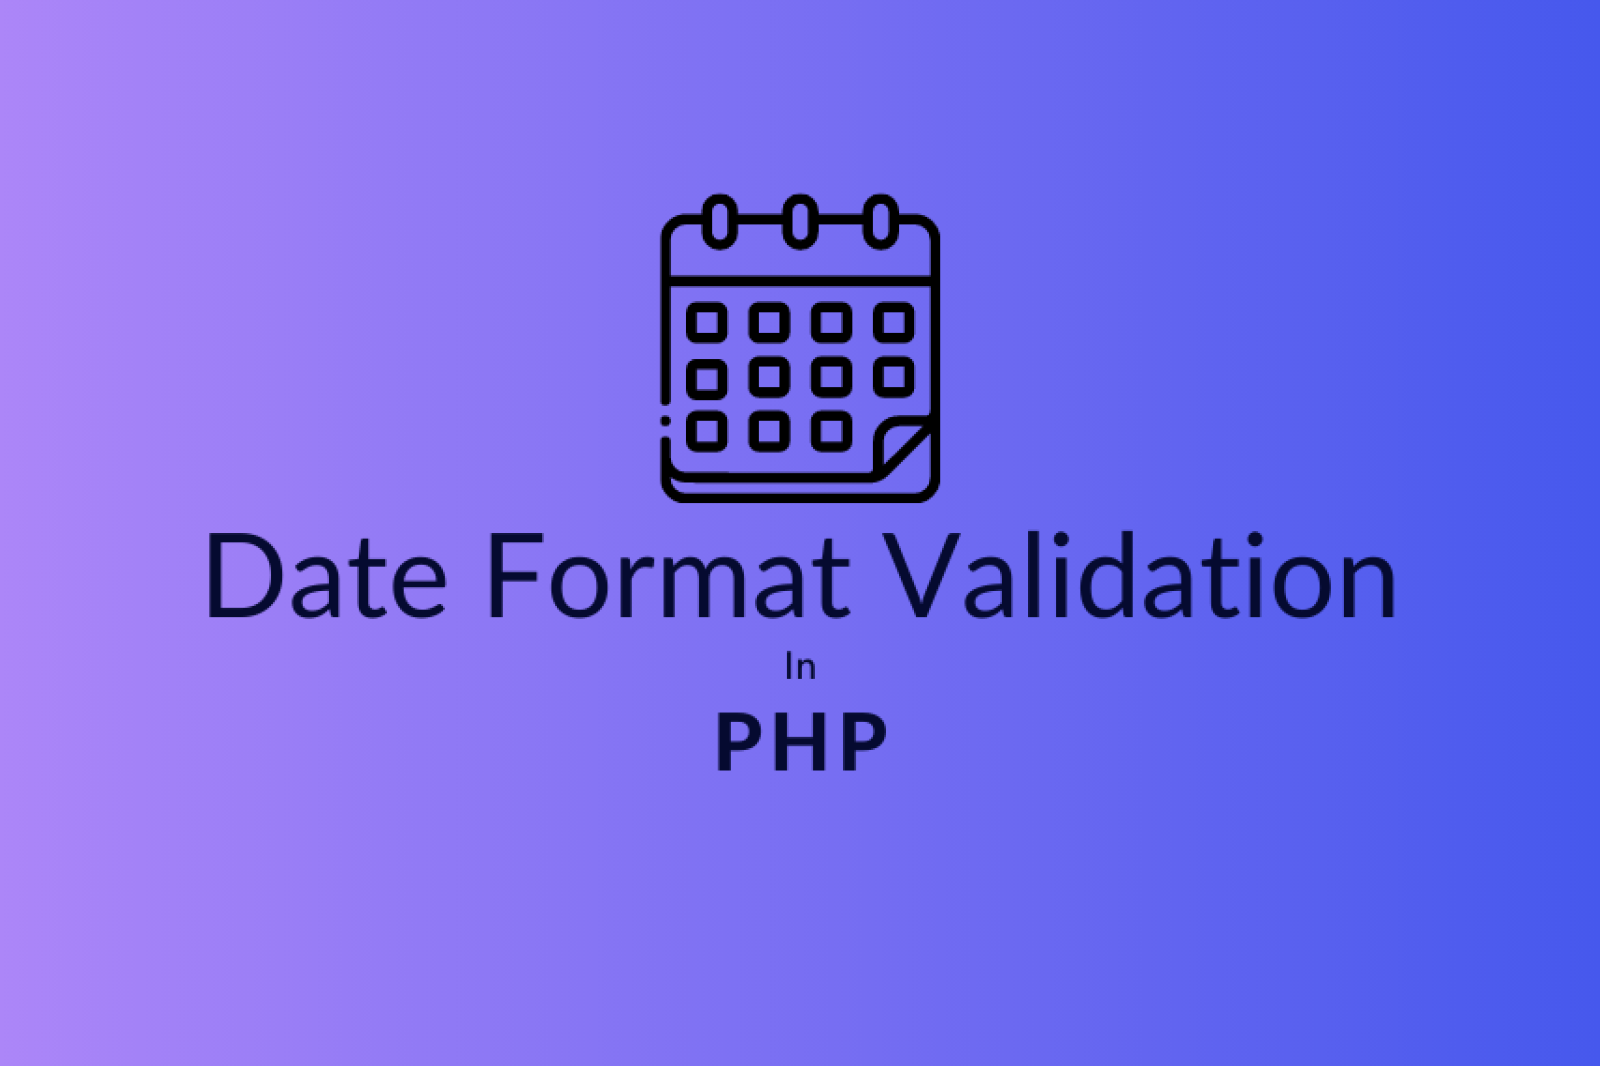 Date Format Validation In PHP